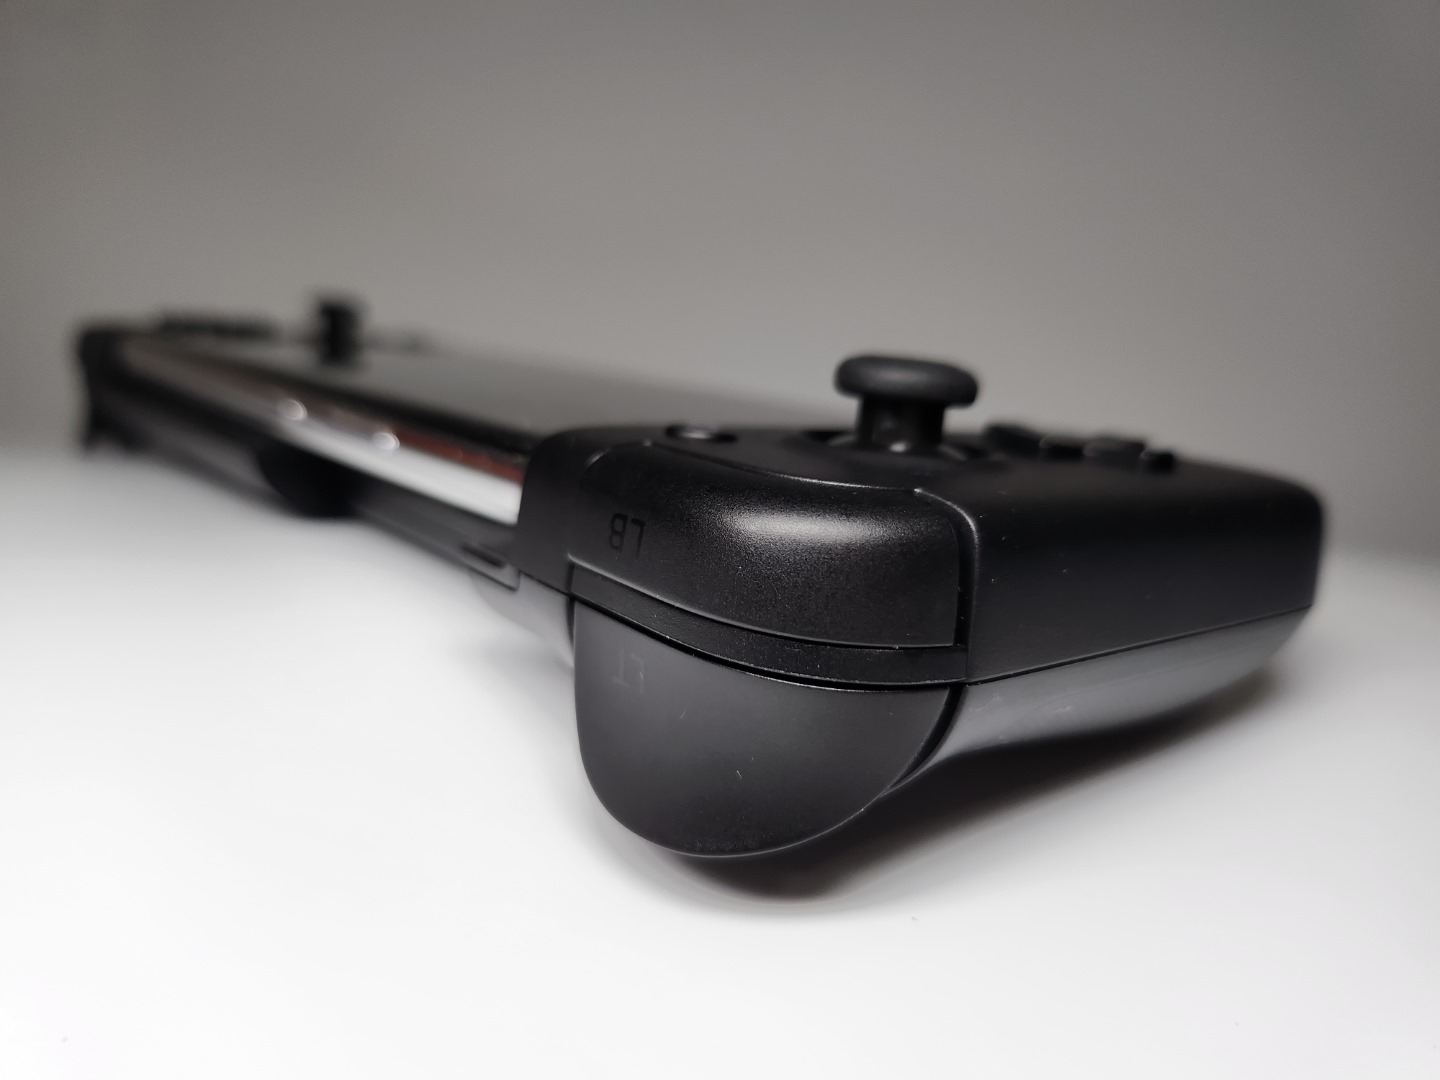 GameSir X2 Pro review: Xbox licensed and perfected